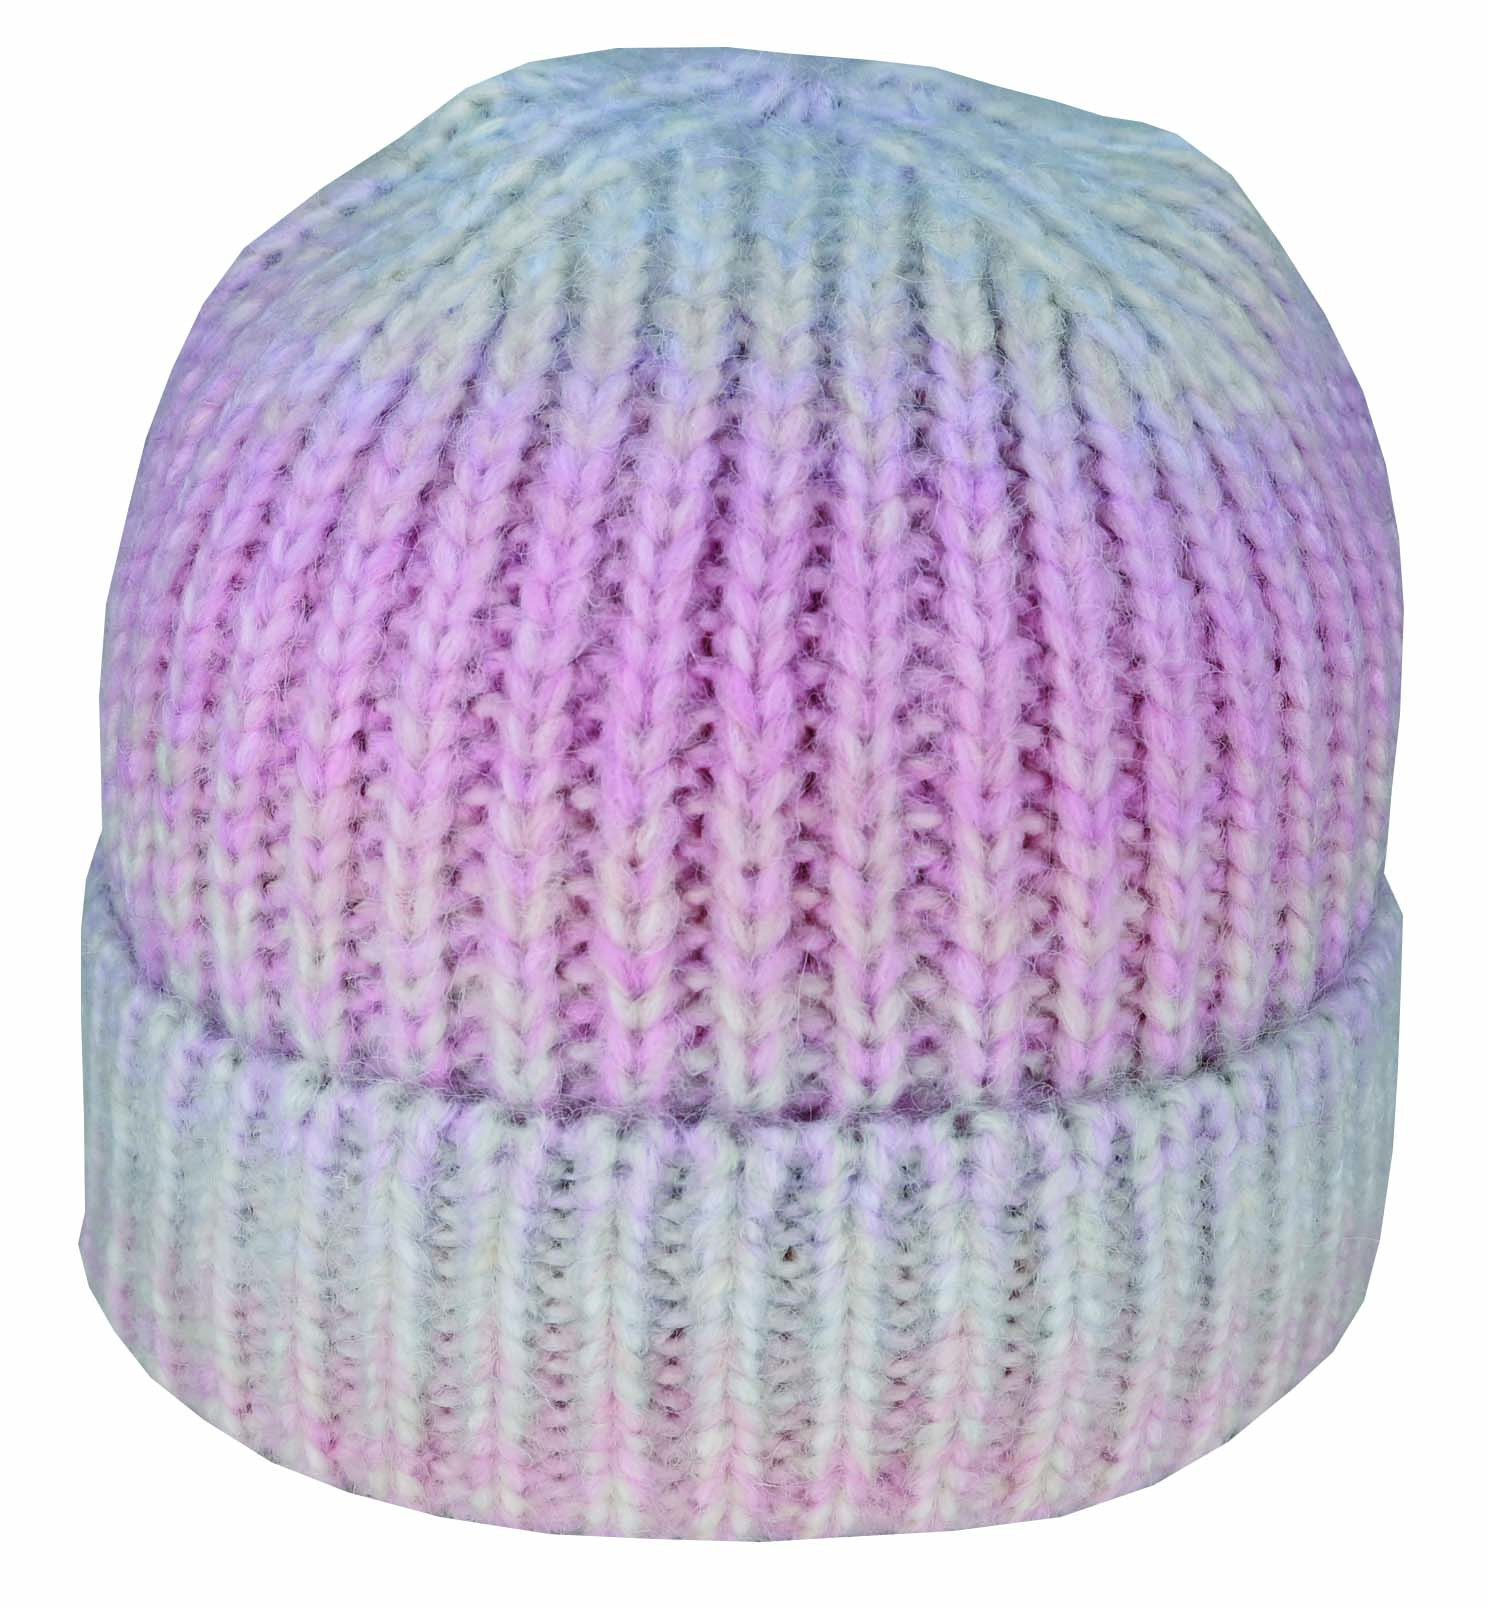 OMBRE KNIT ACRYLIC BLEND CUFFED BEANIE - PACK 12